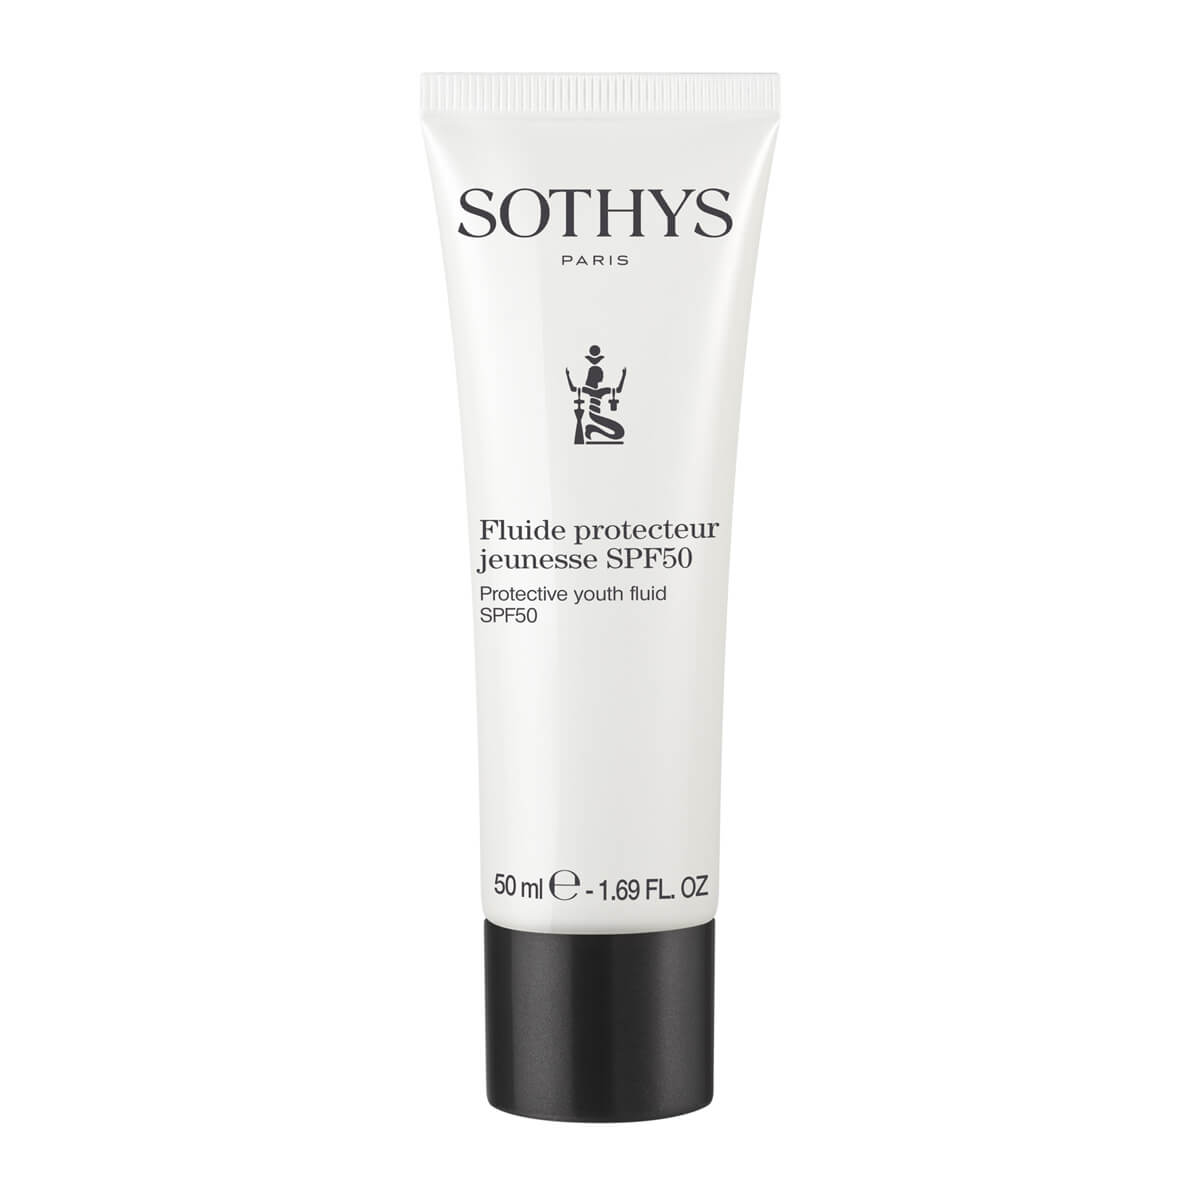 Sothys Protective Youth Fluid SPF50